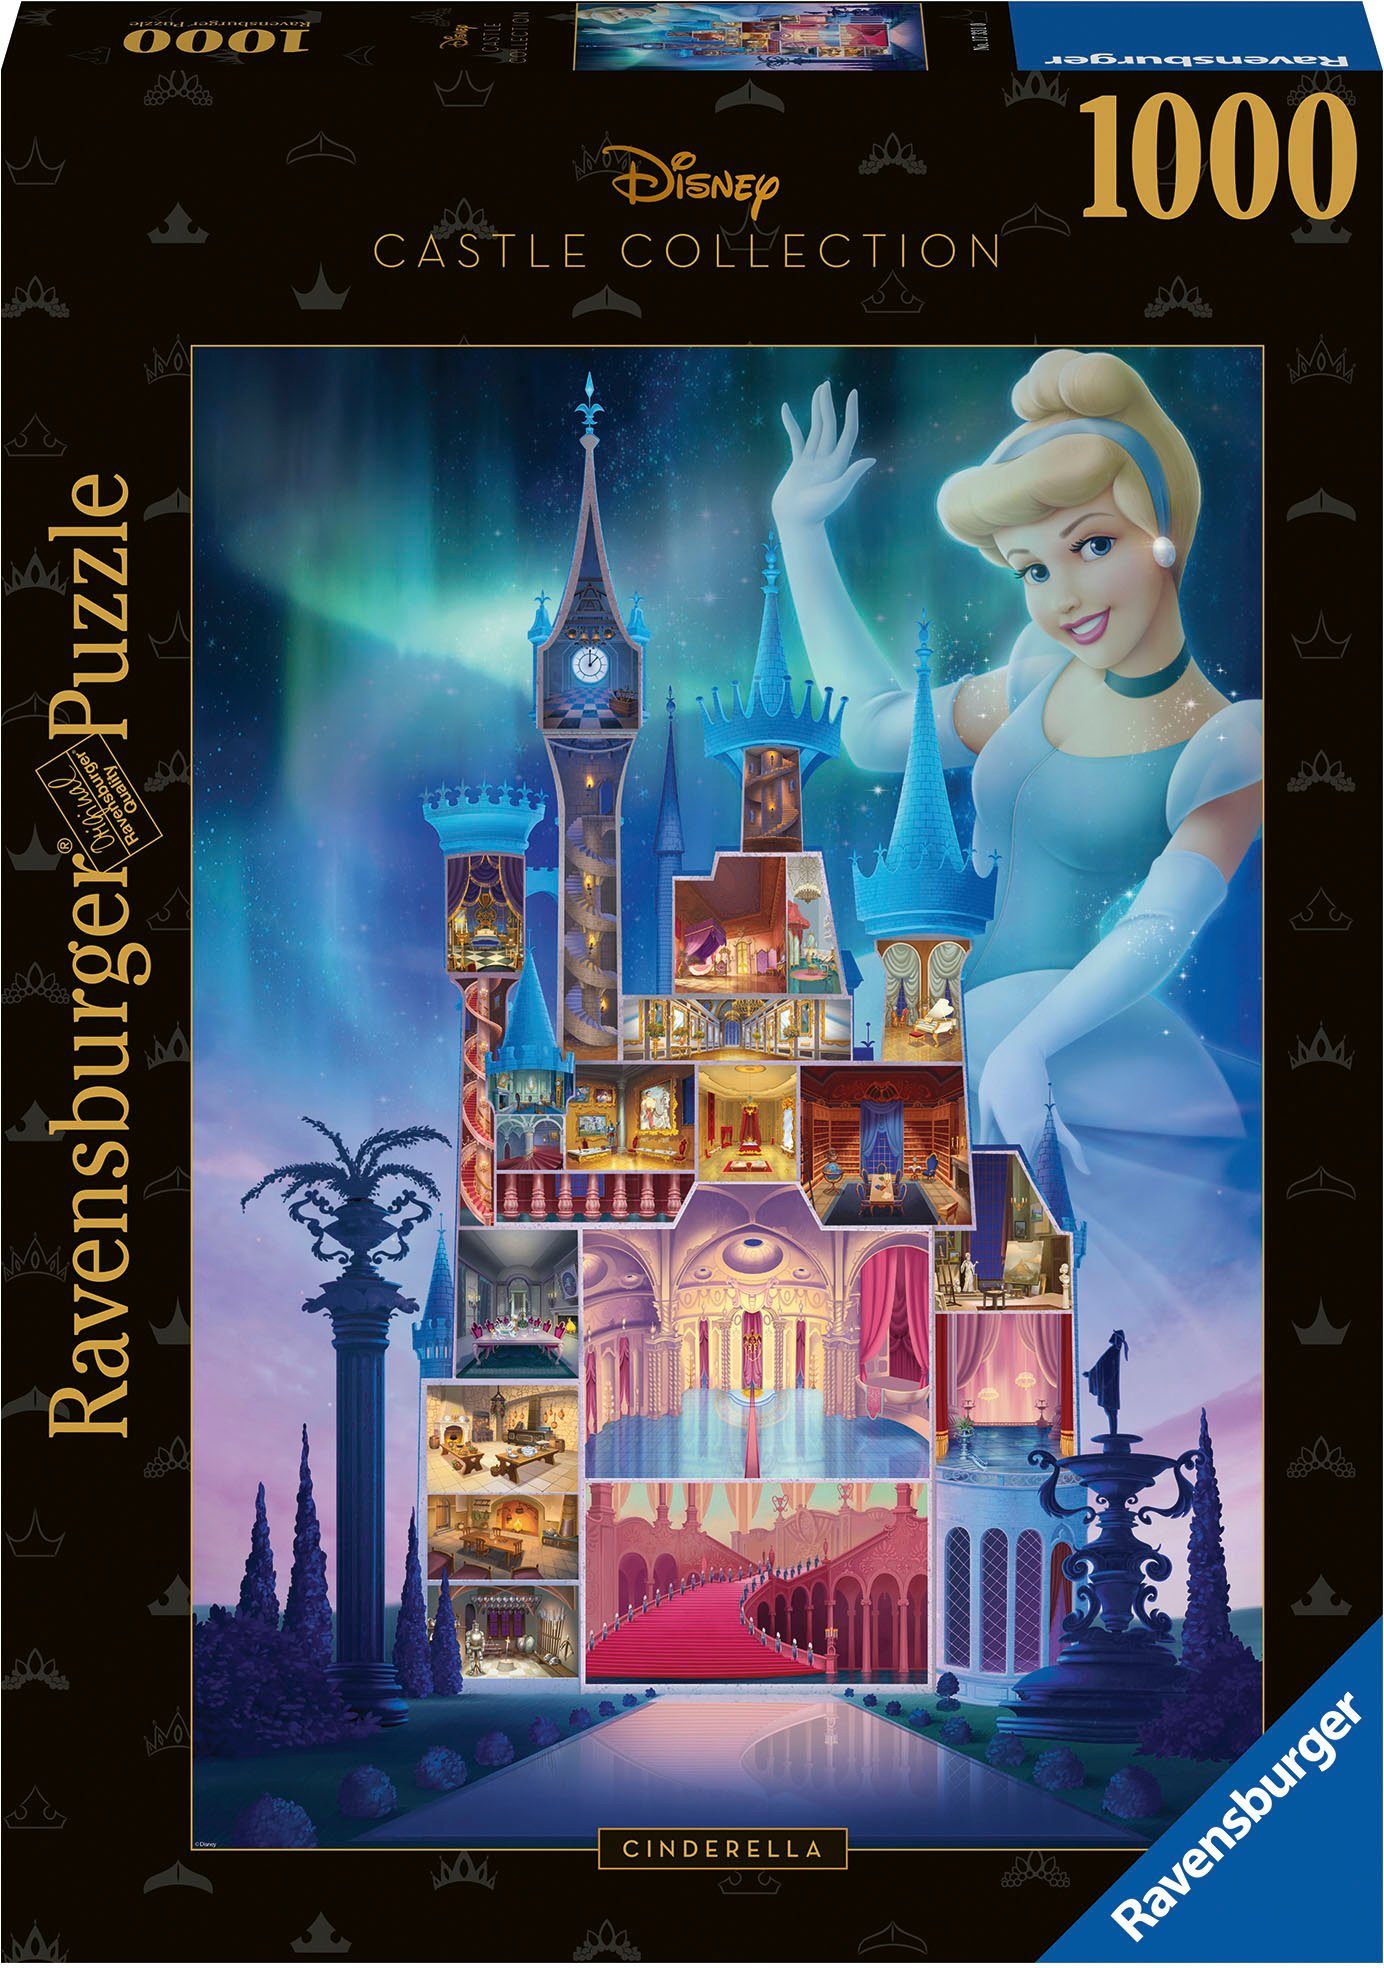 Puzzleteile, Ravensburger Cinderella, Collection, Made in 1000 Germany Puzzle Disney Castle